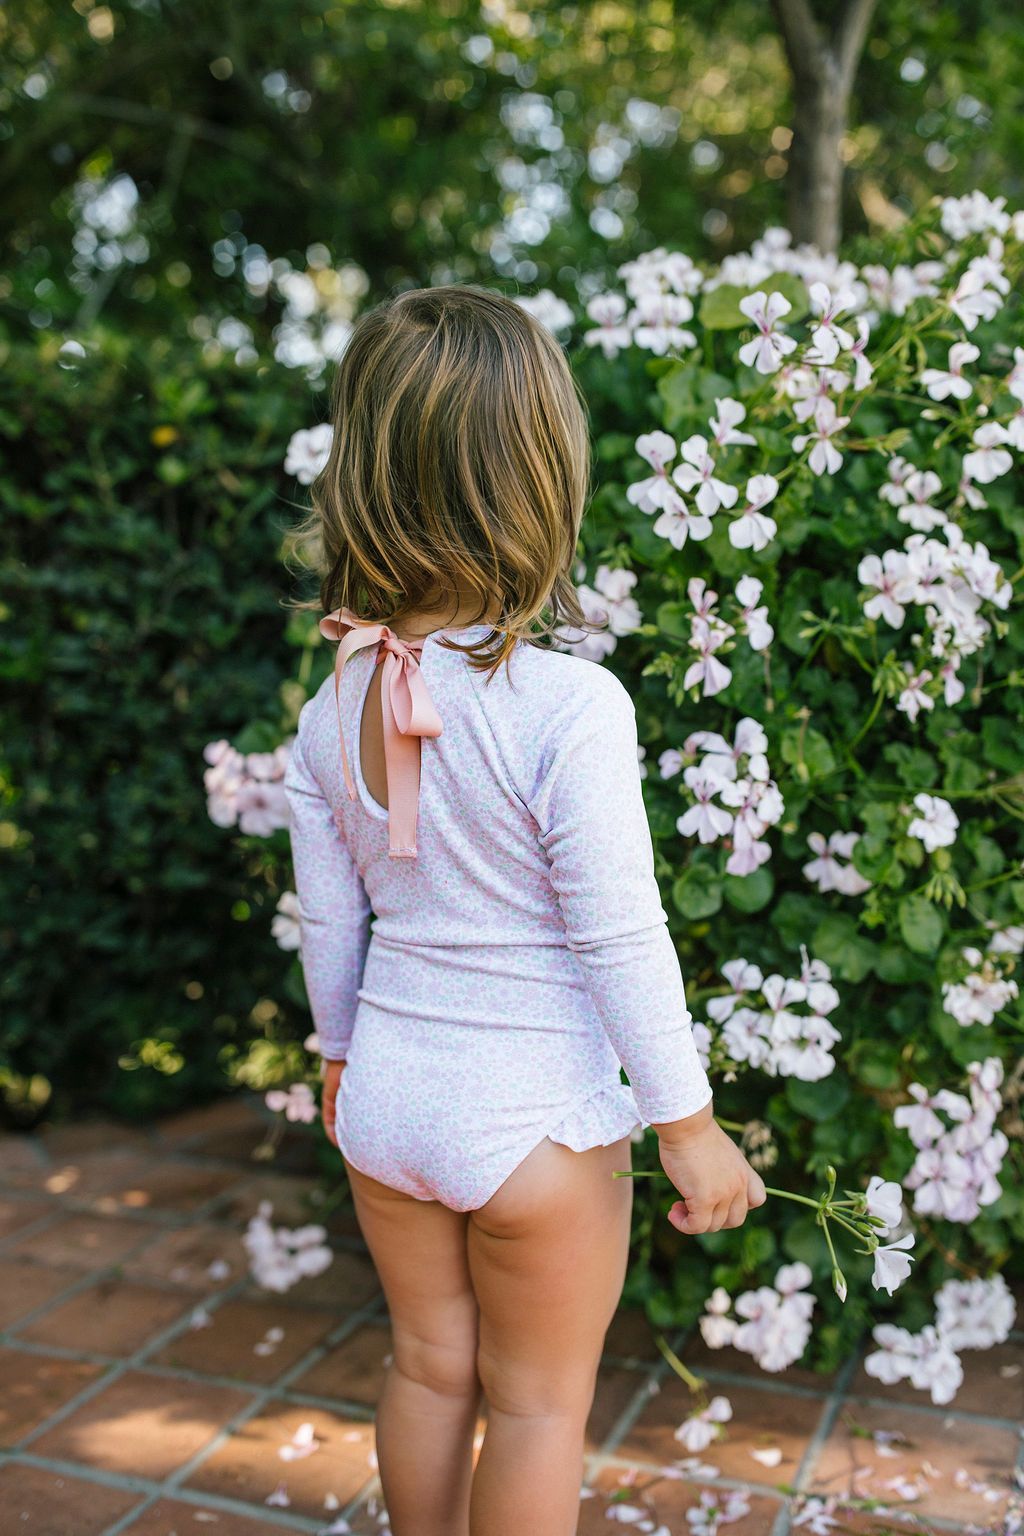 Girls Rashguard One-Piece in Antique Floral